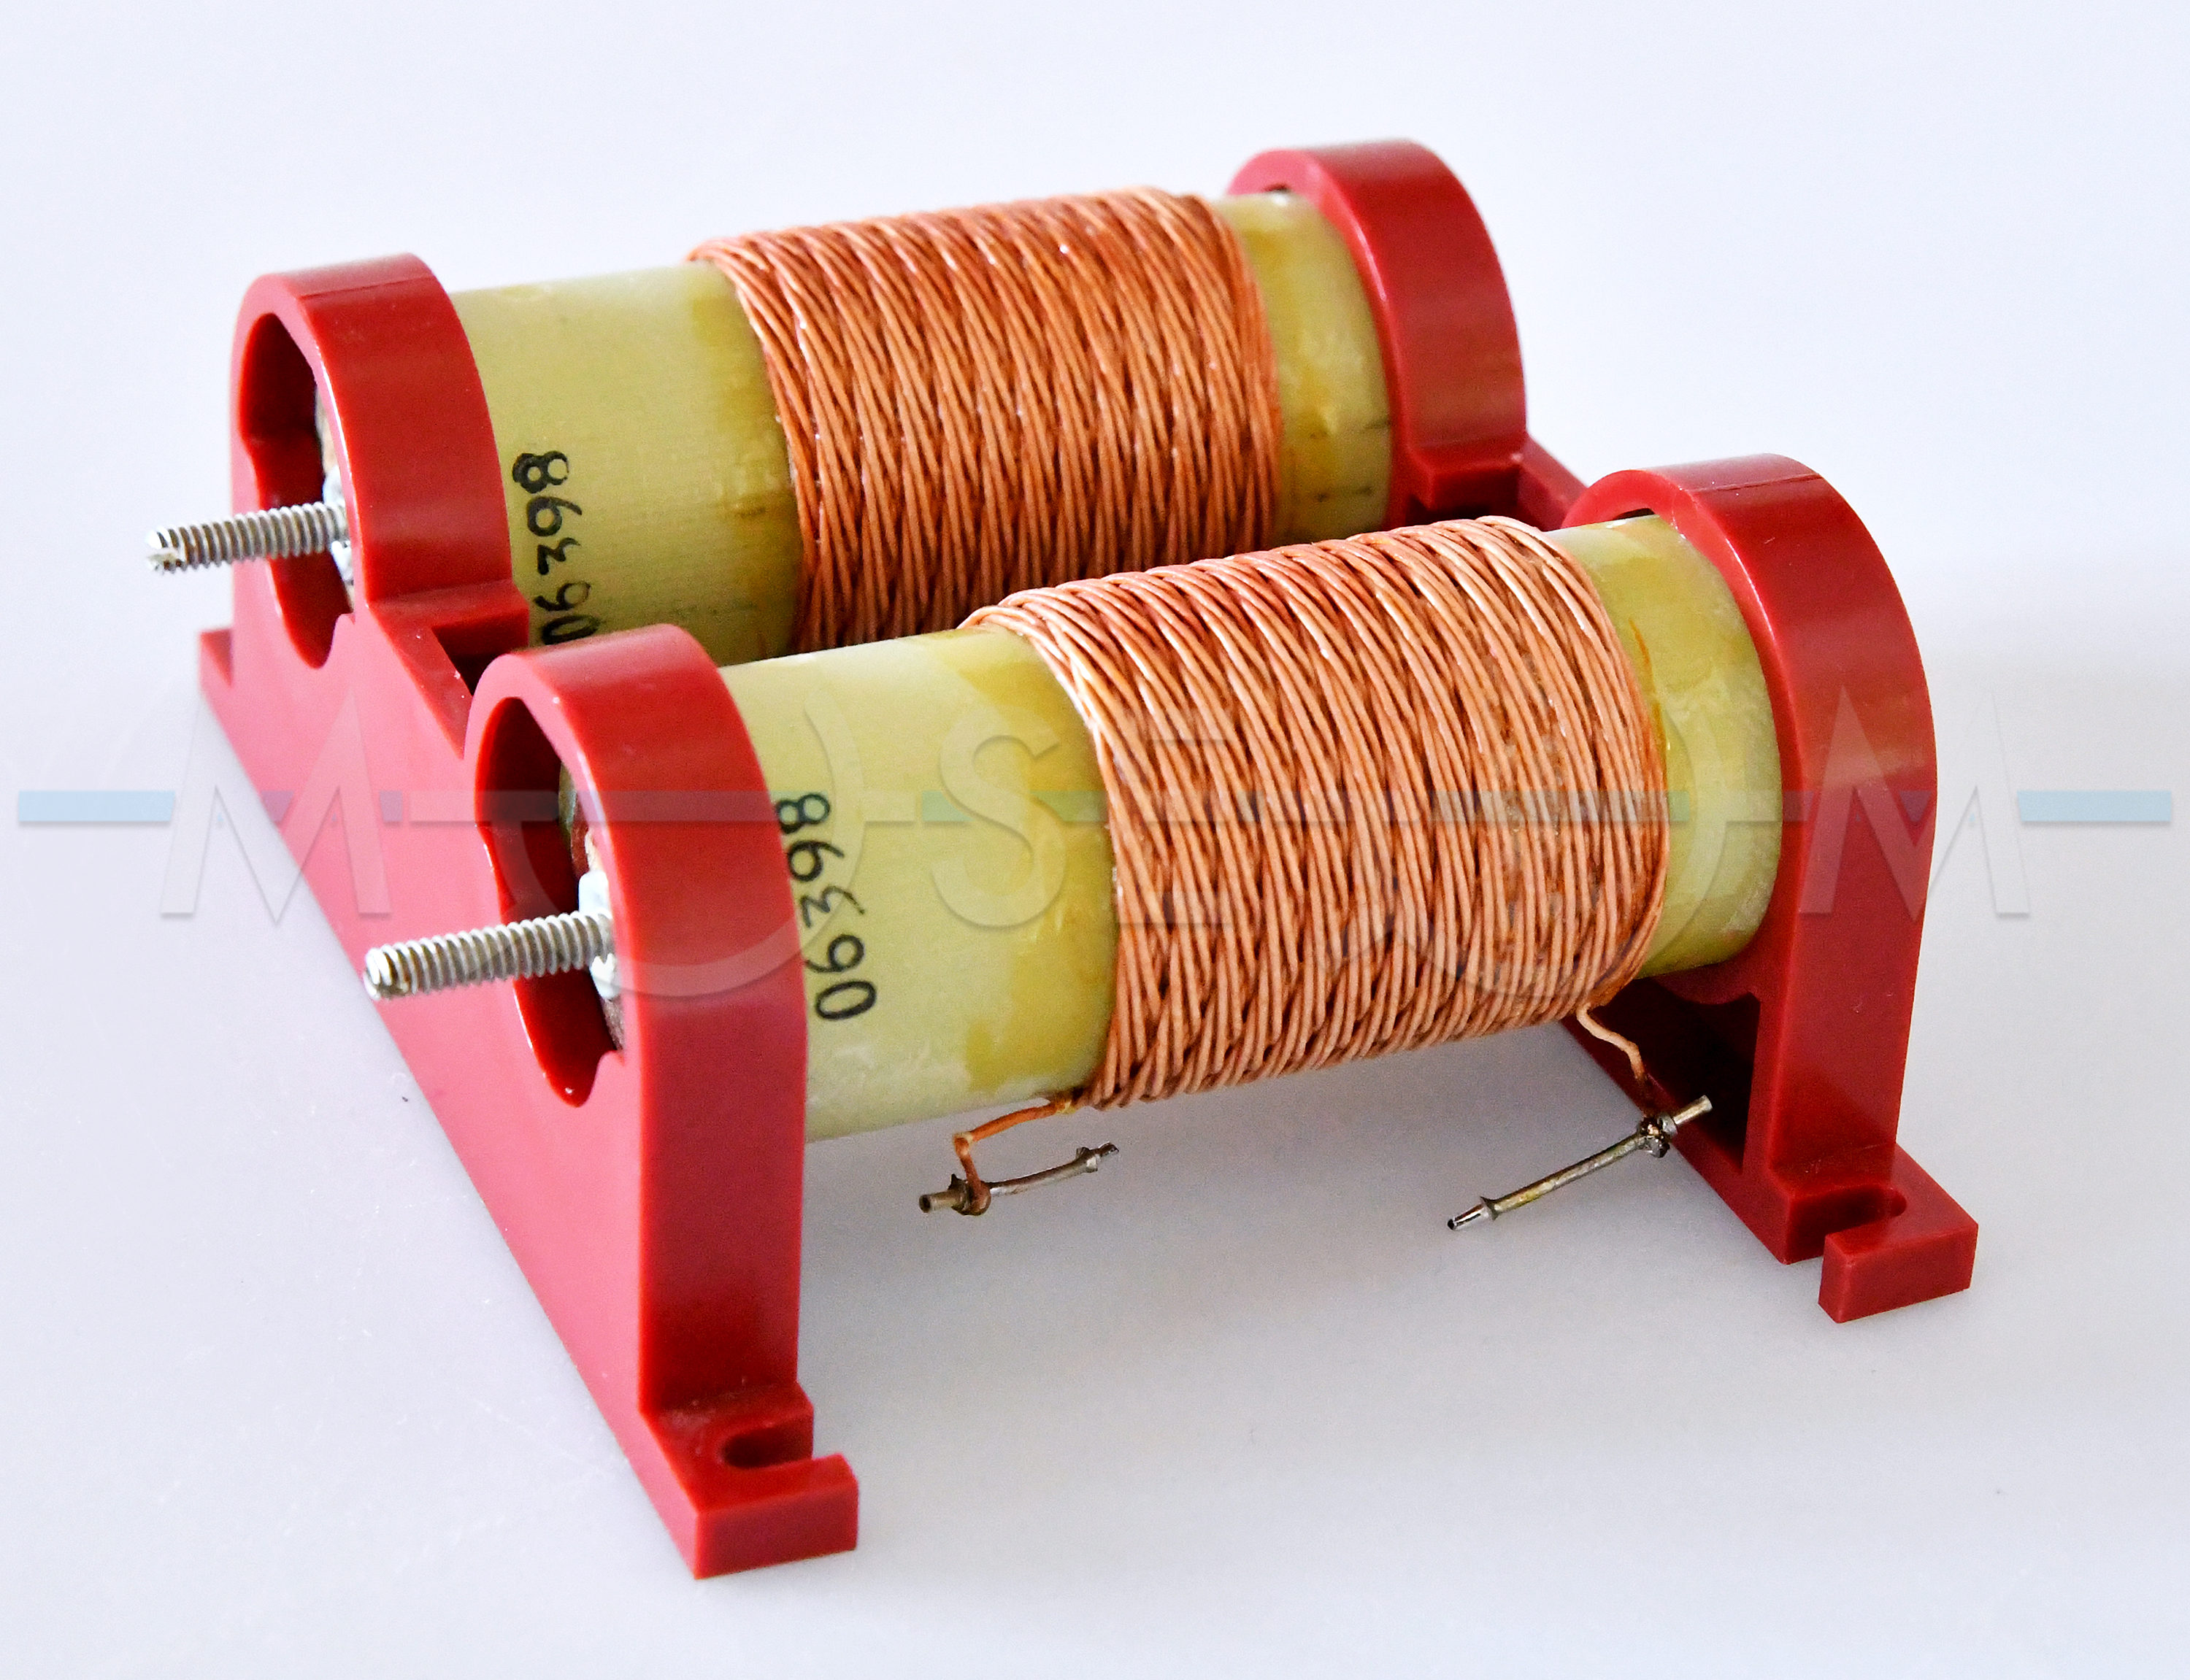 Radio frequency coils